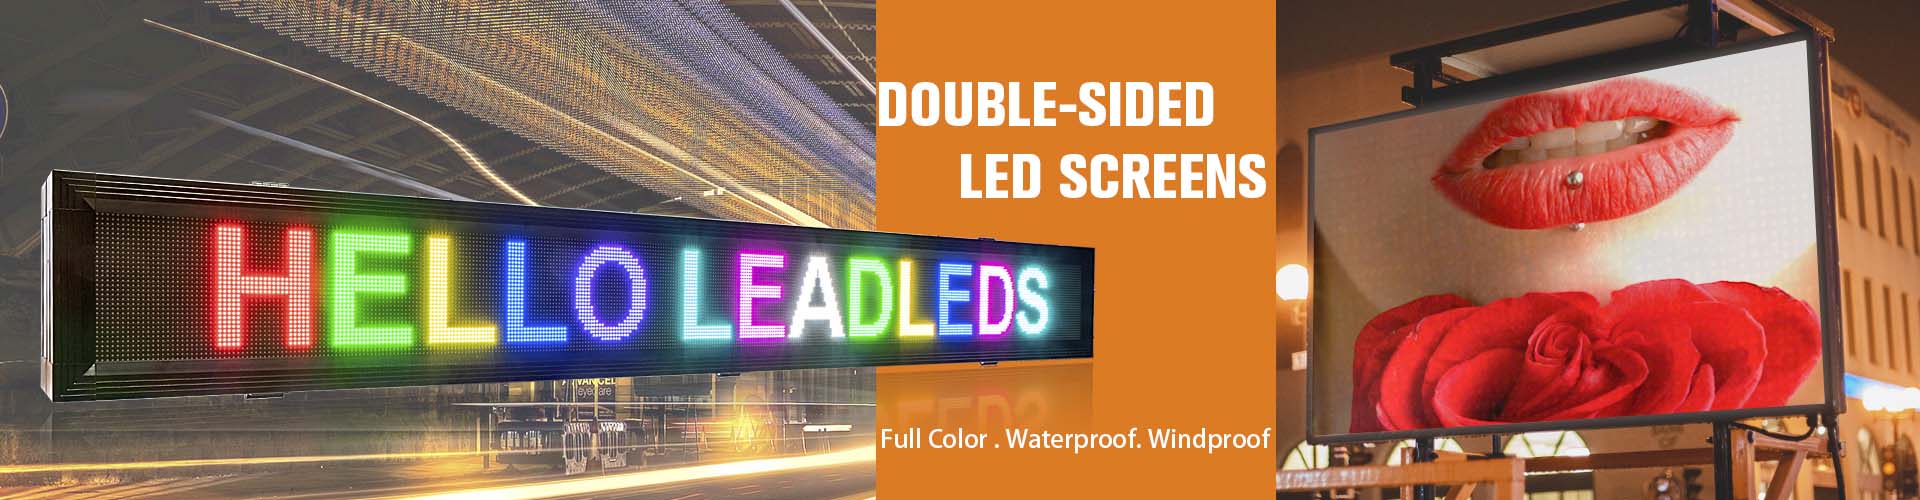 double-sided led screens